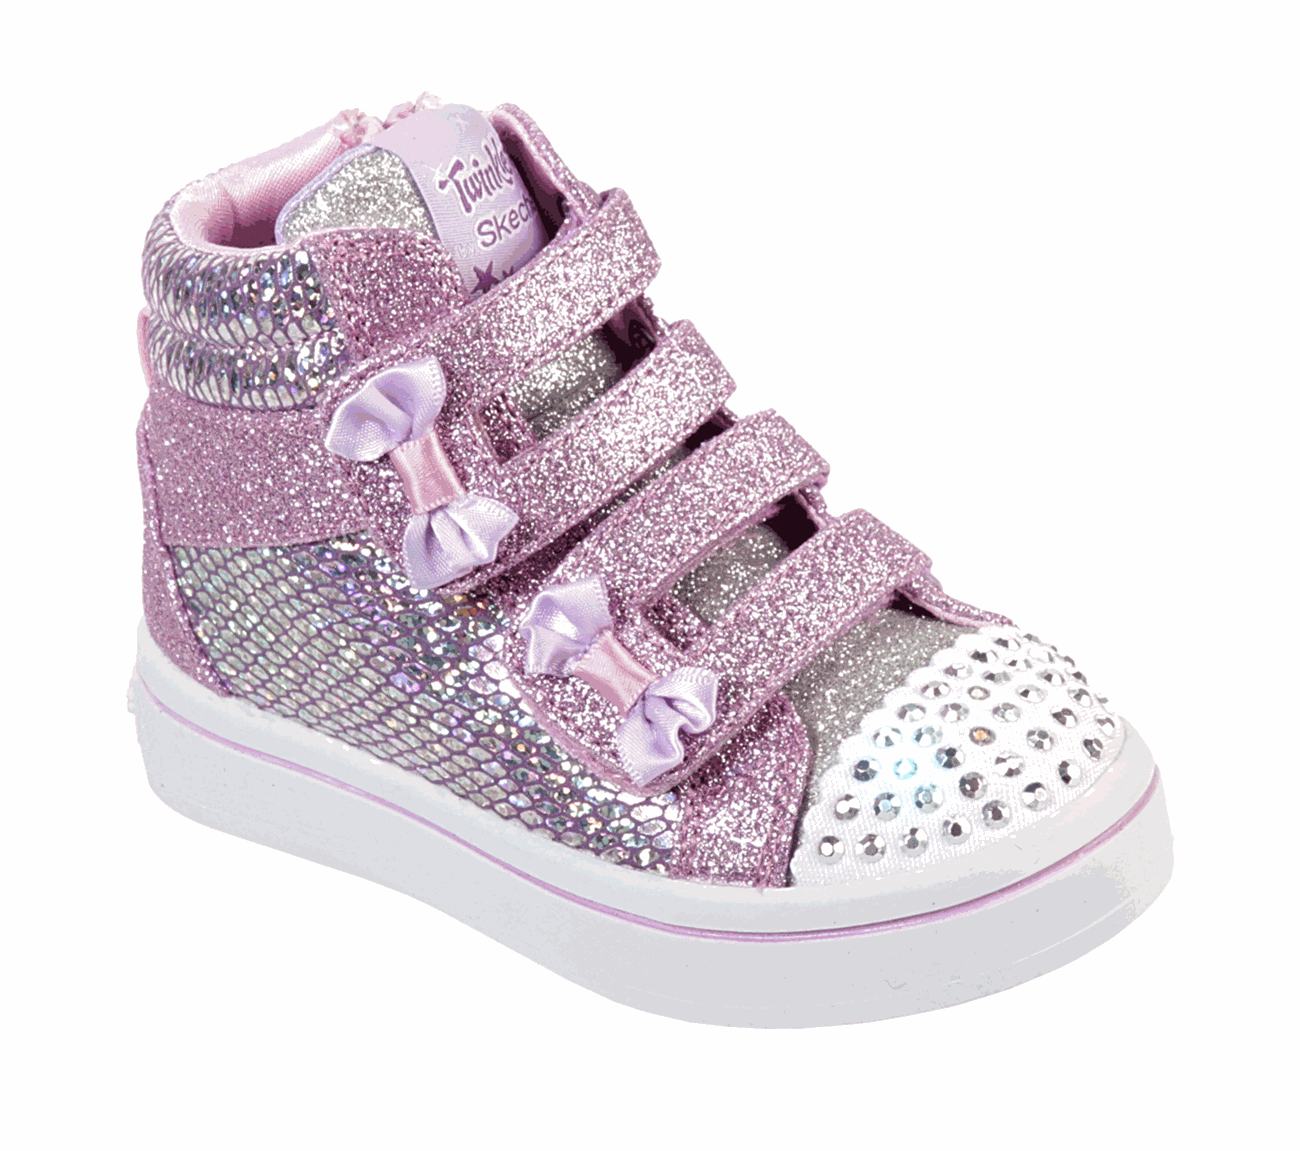 Buy SKECHERS Twinkle Toes: Twi-Lites - Miss Holla-Glam S-Lights Shoes